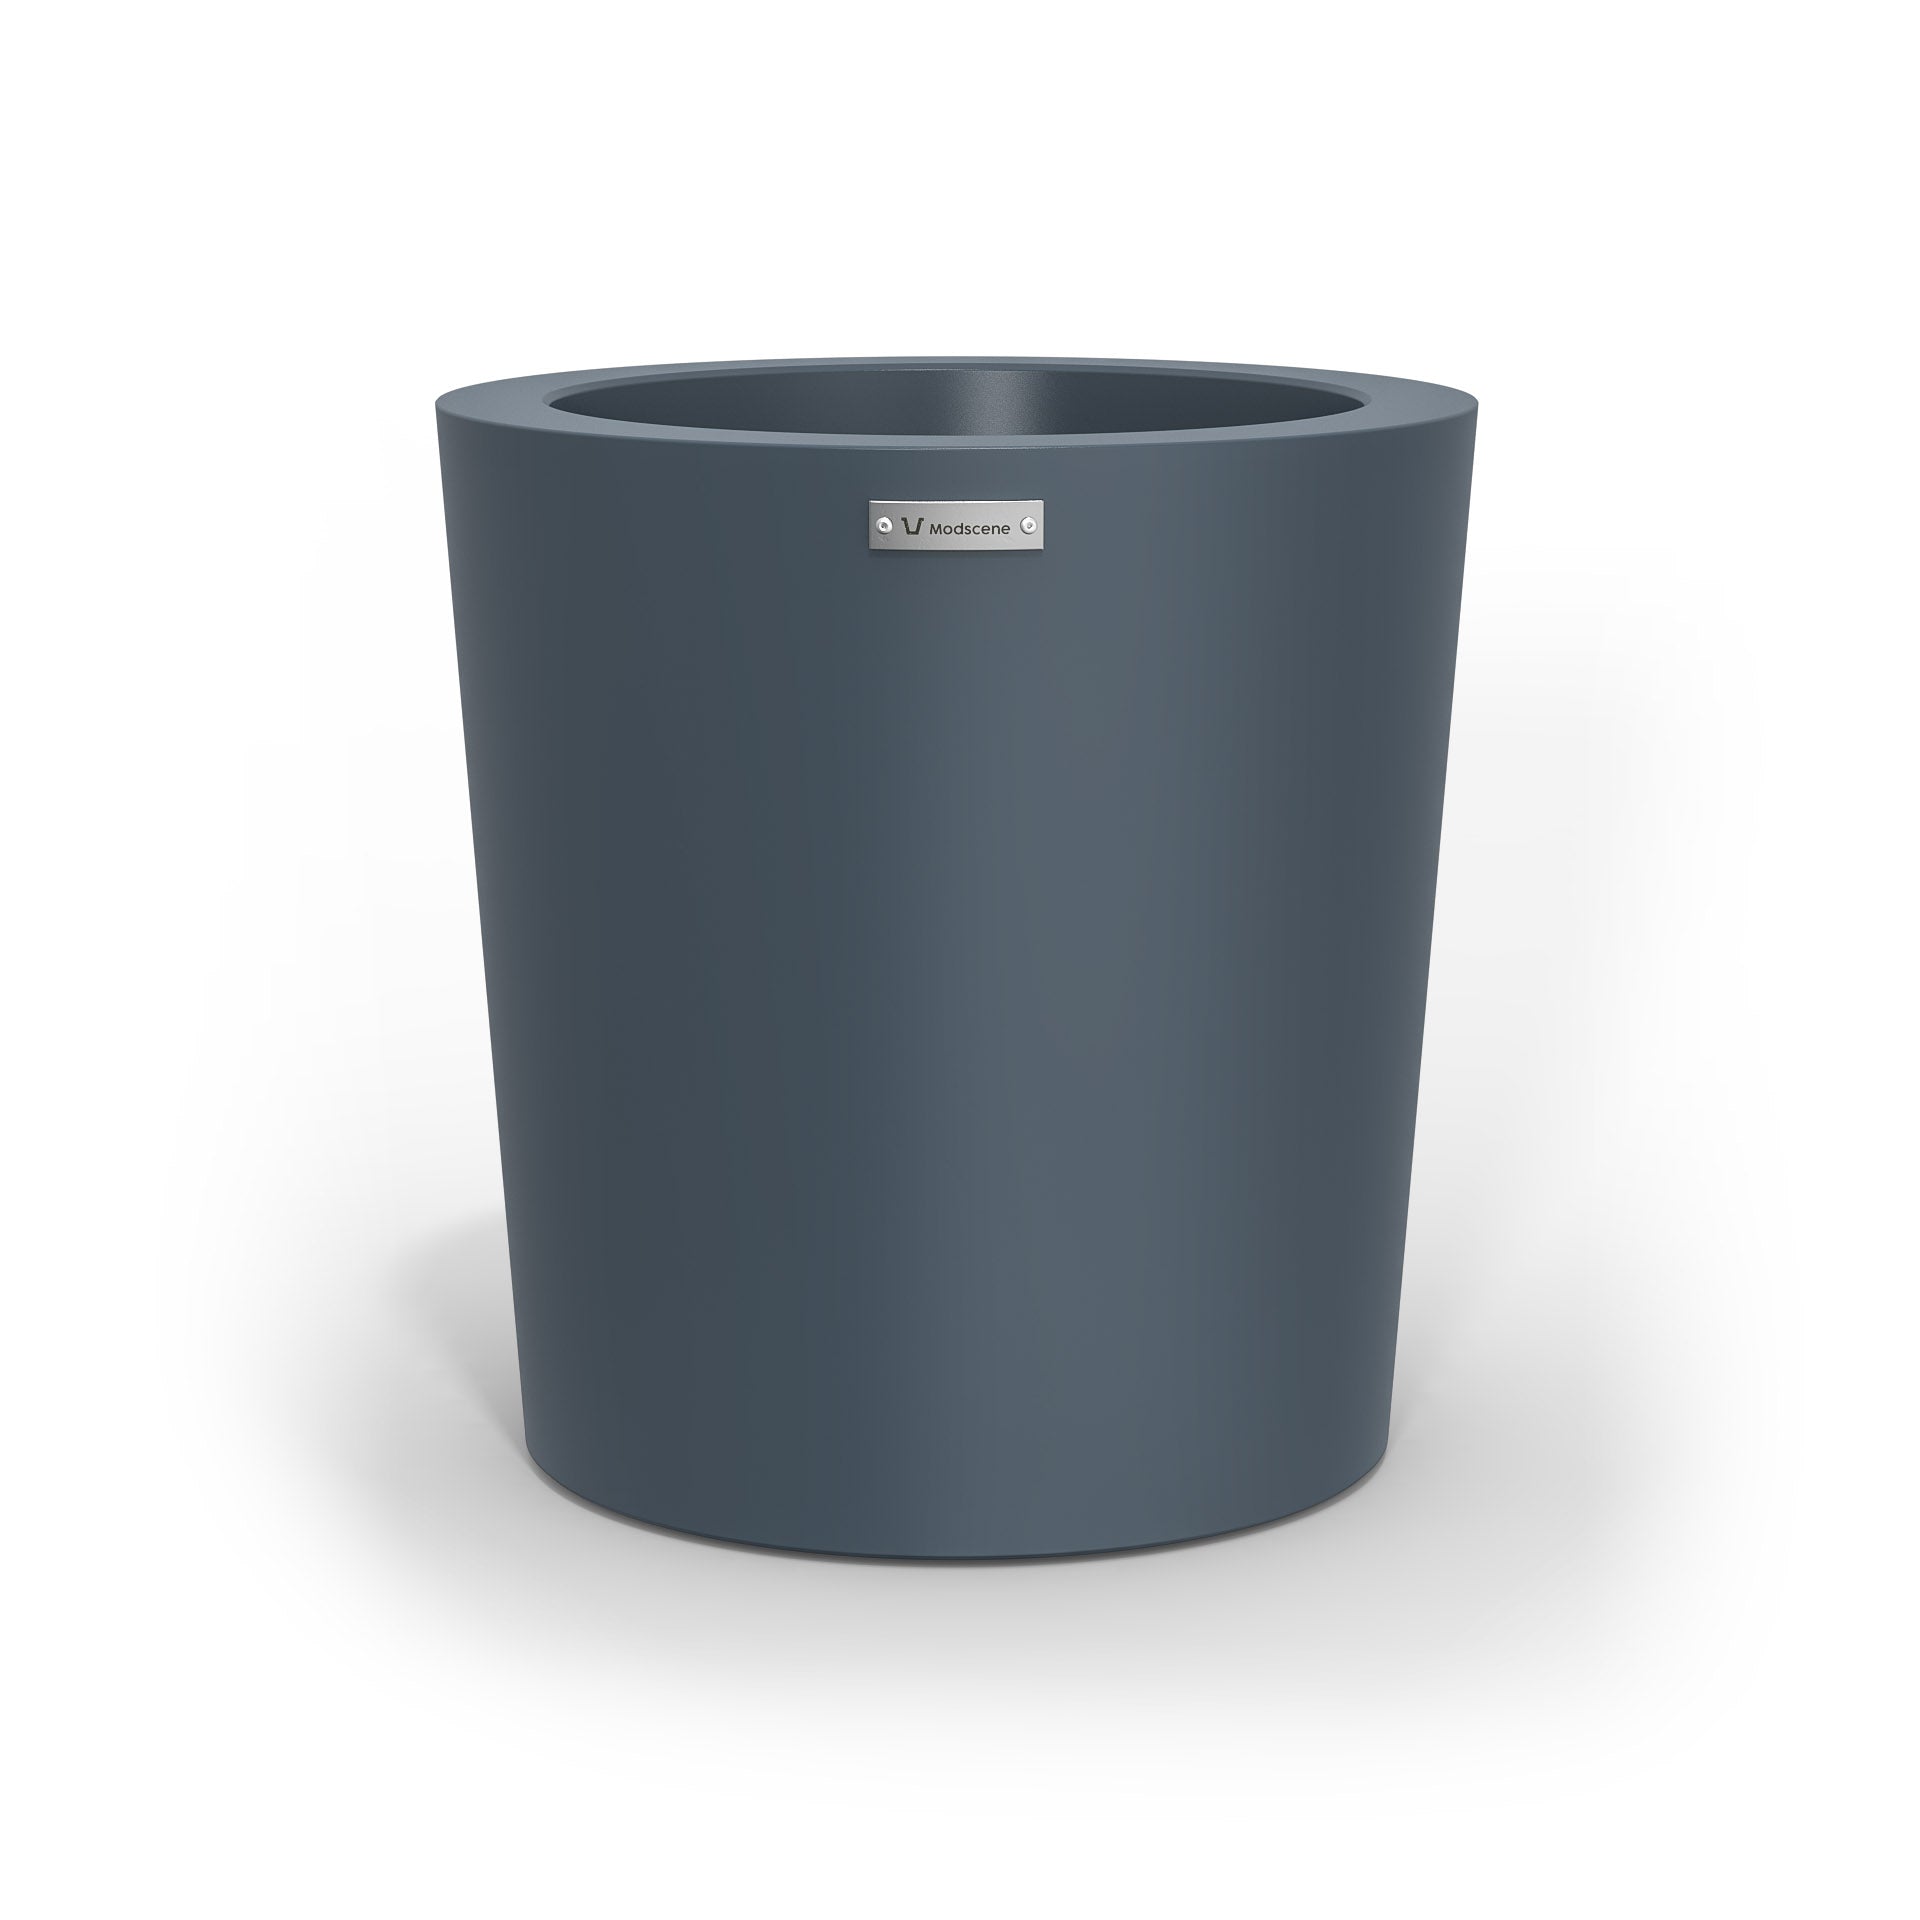 A modern style planter pot in a storm blue colour. Made by Modscene NZ.